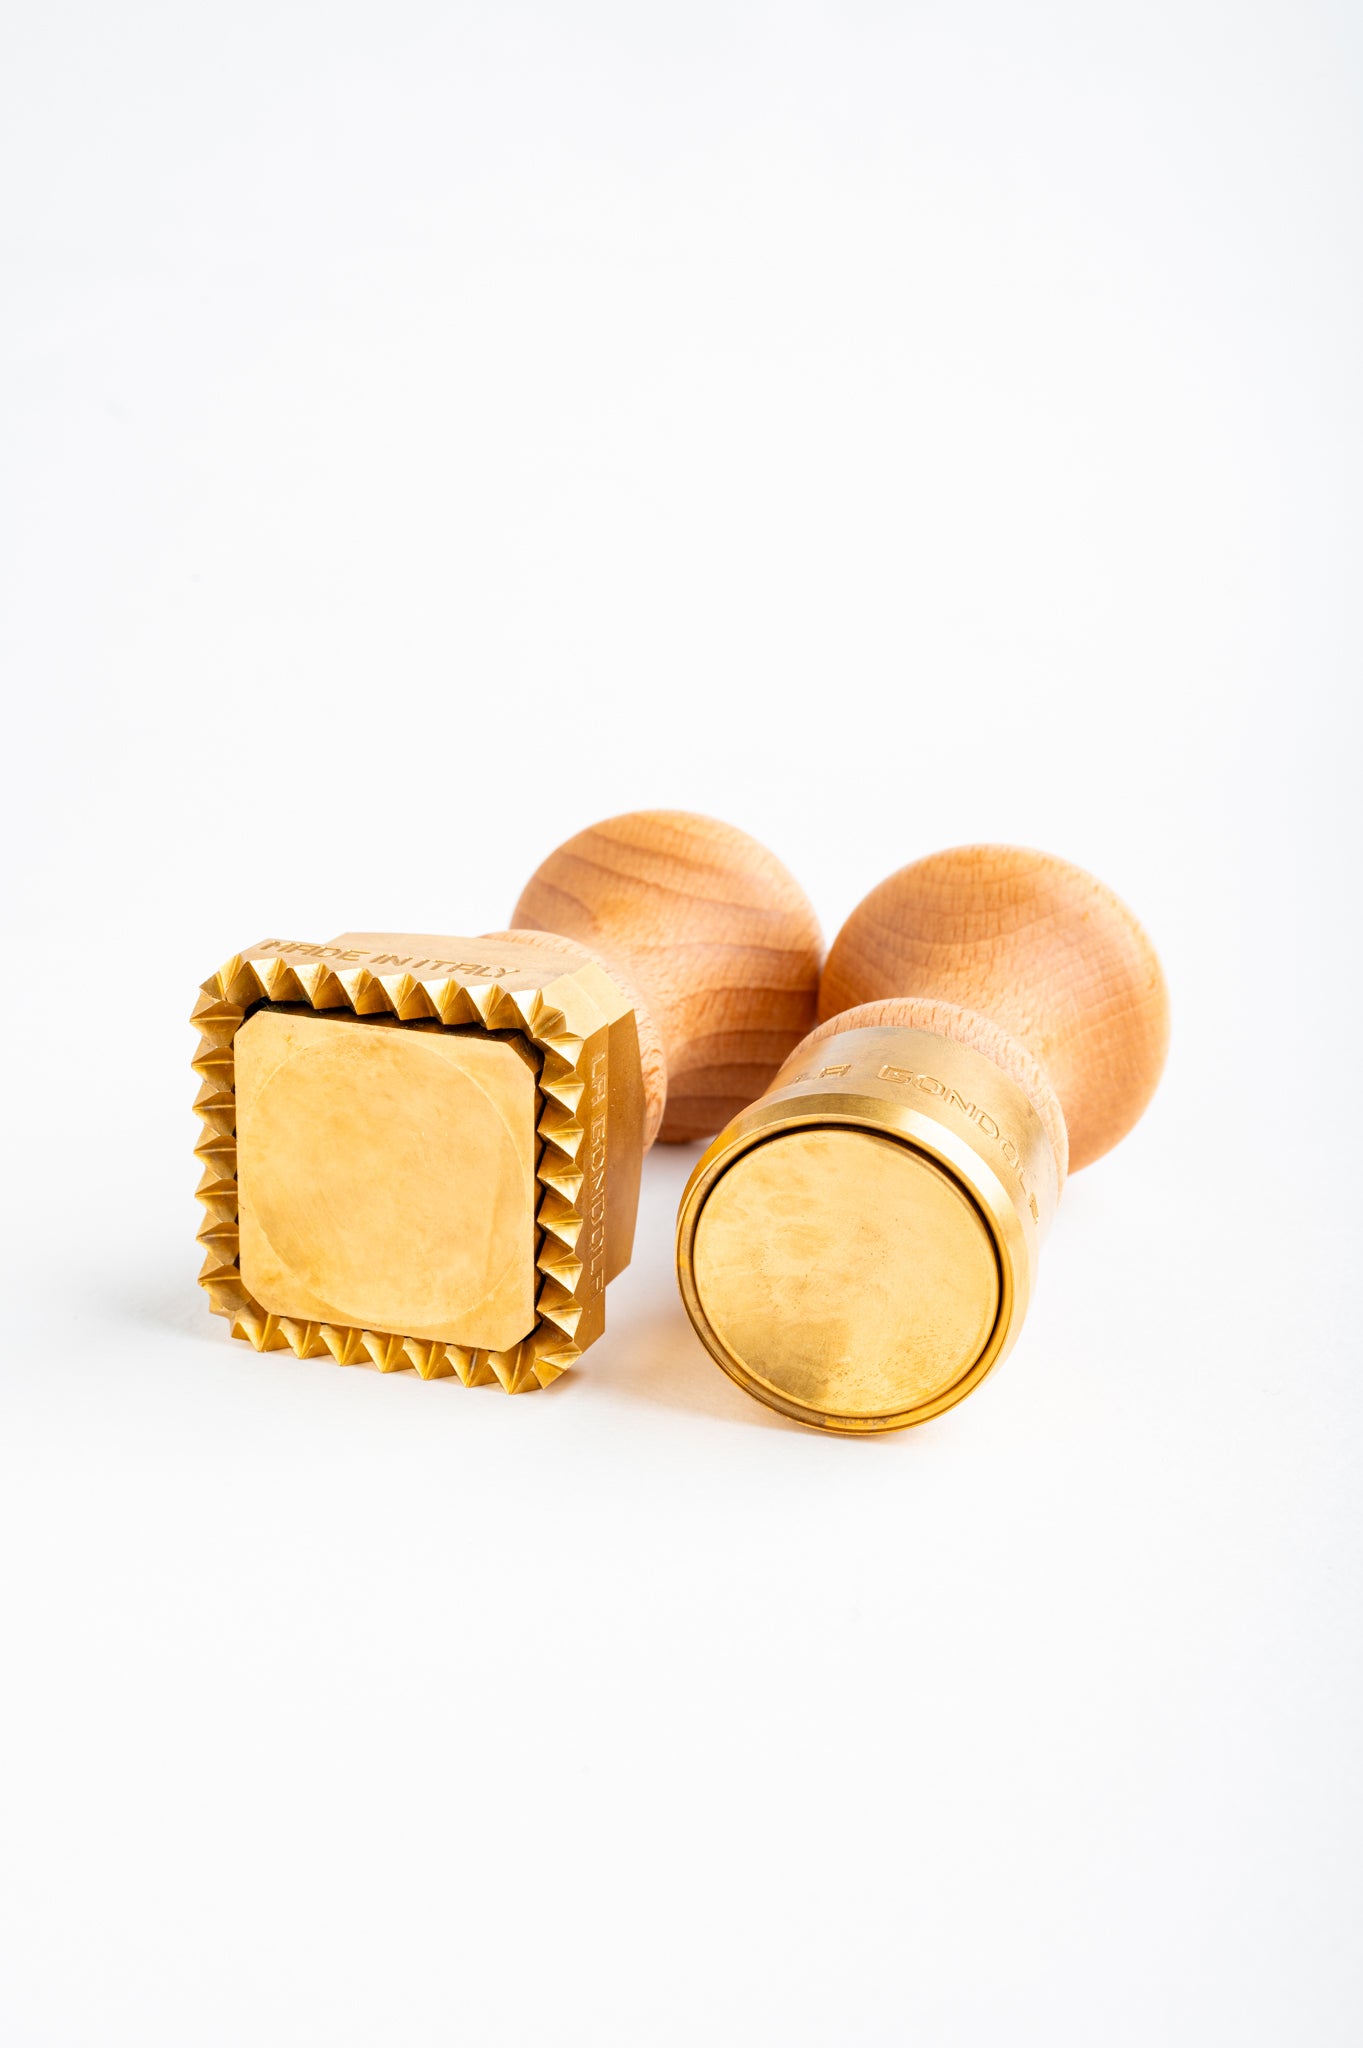 Professional set of two pasta and ravioli stamps: 1 Round and 1 Square